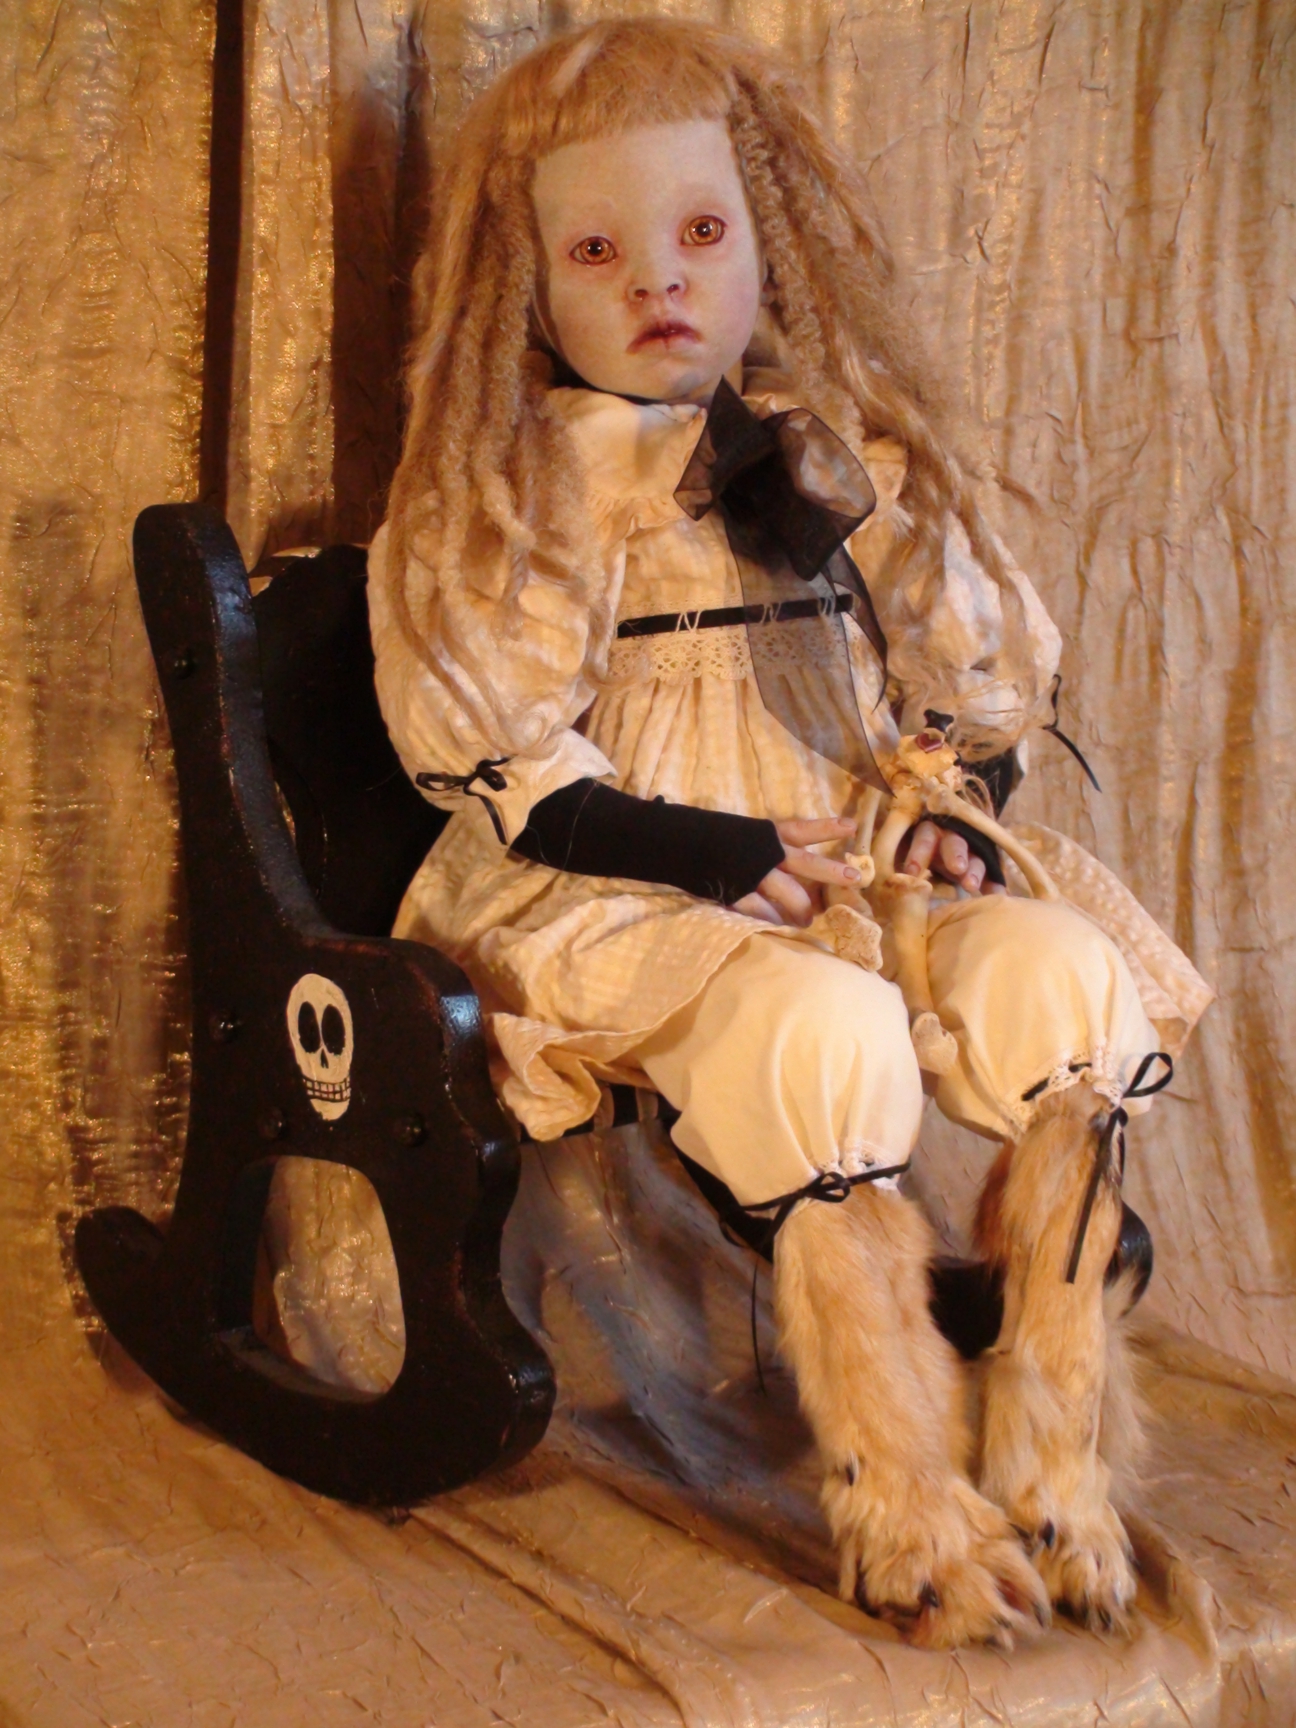 gothic fantasy artdoll with taxidermy stuffed coyote legs she is pale with orange eyes and blond hair dredlocks she wears a tea-stained dress and sits with a bone dog toy in her lap